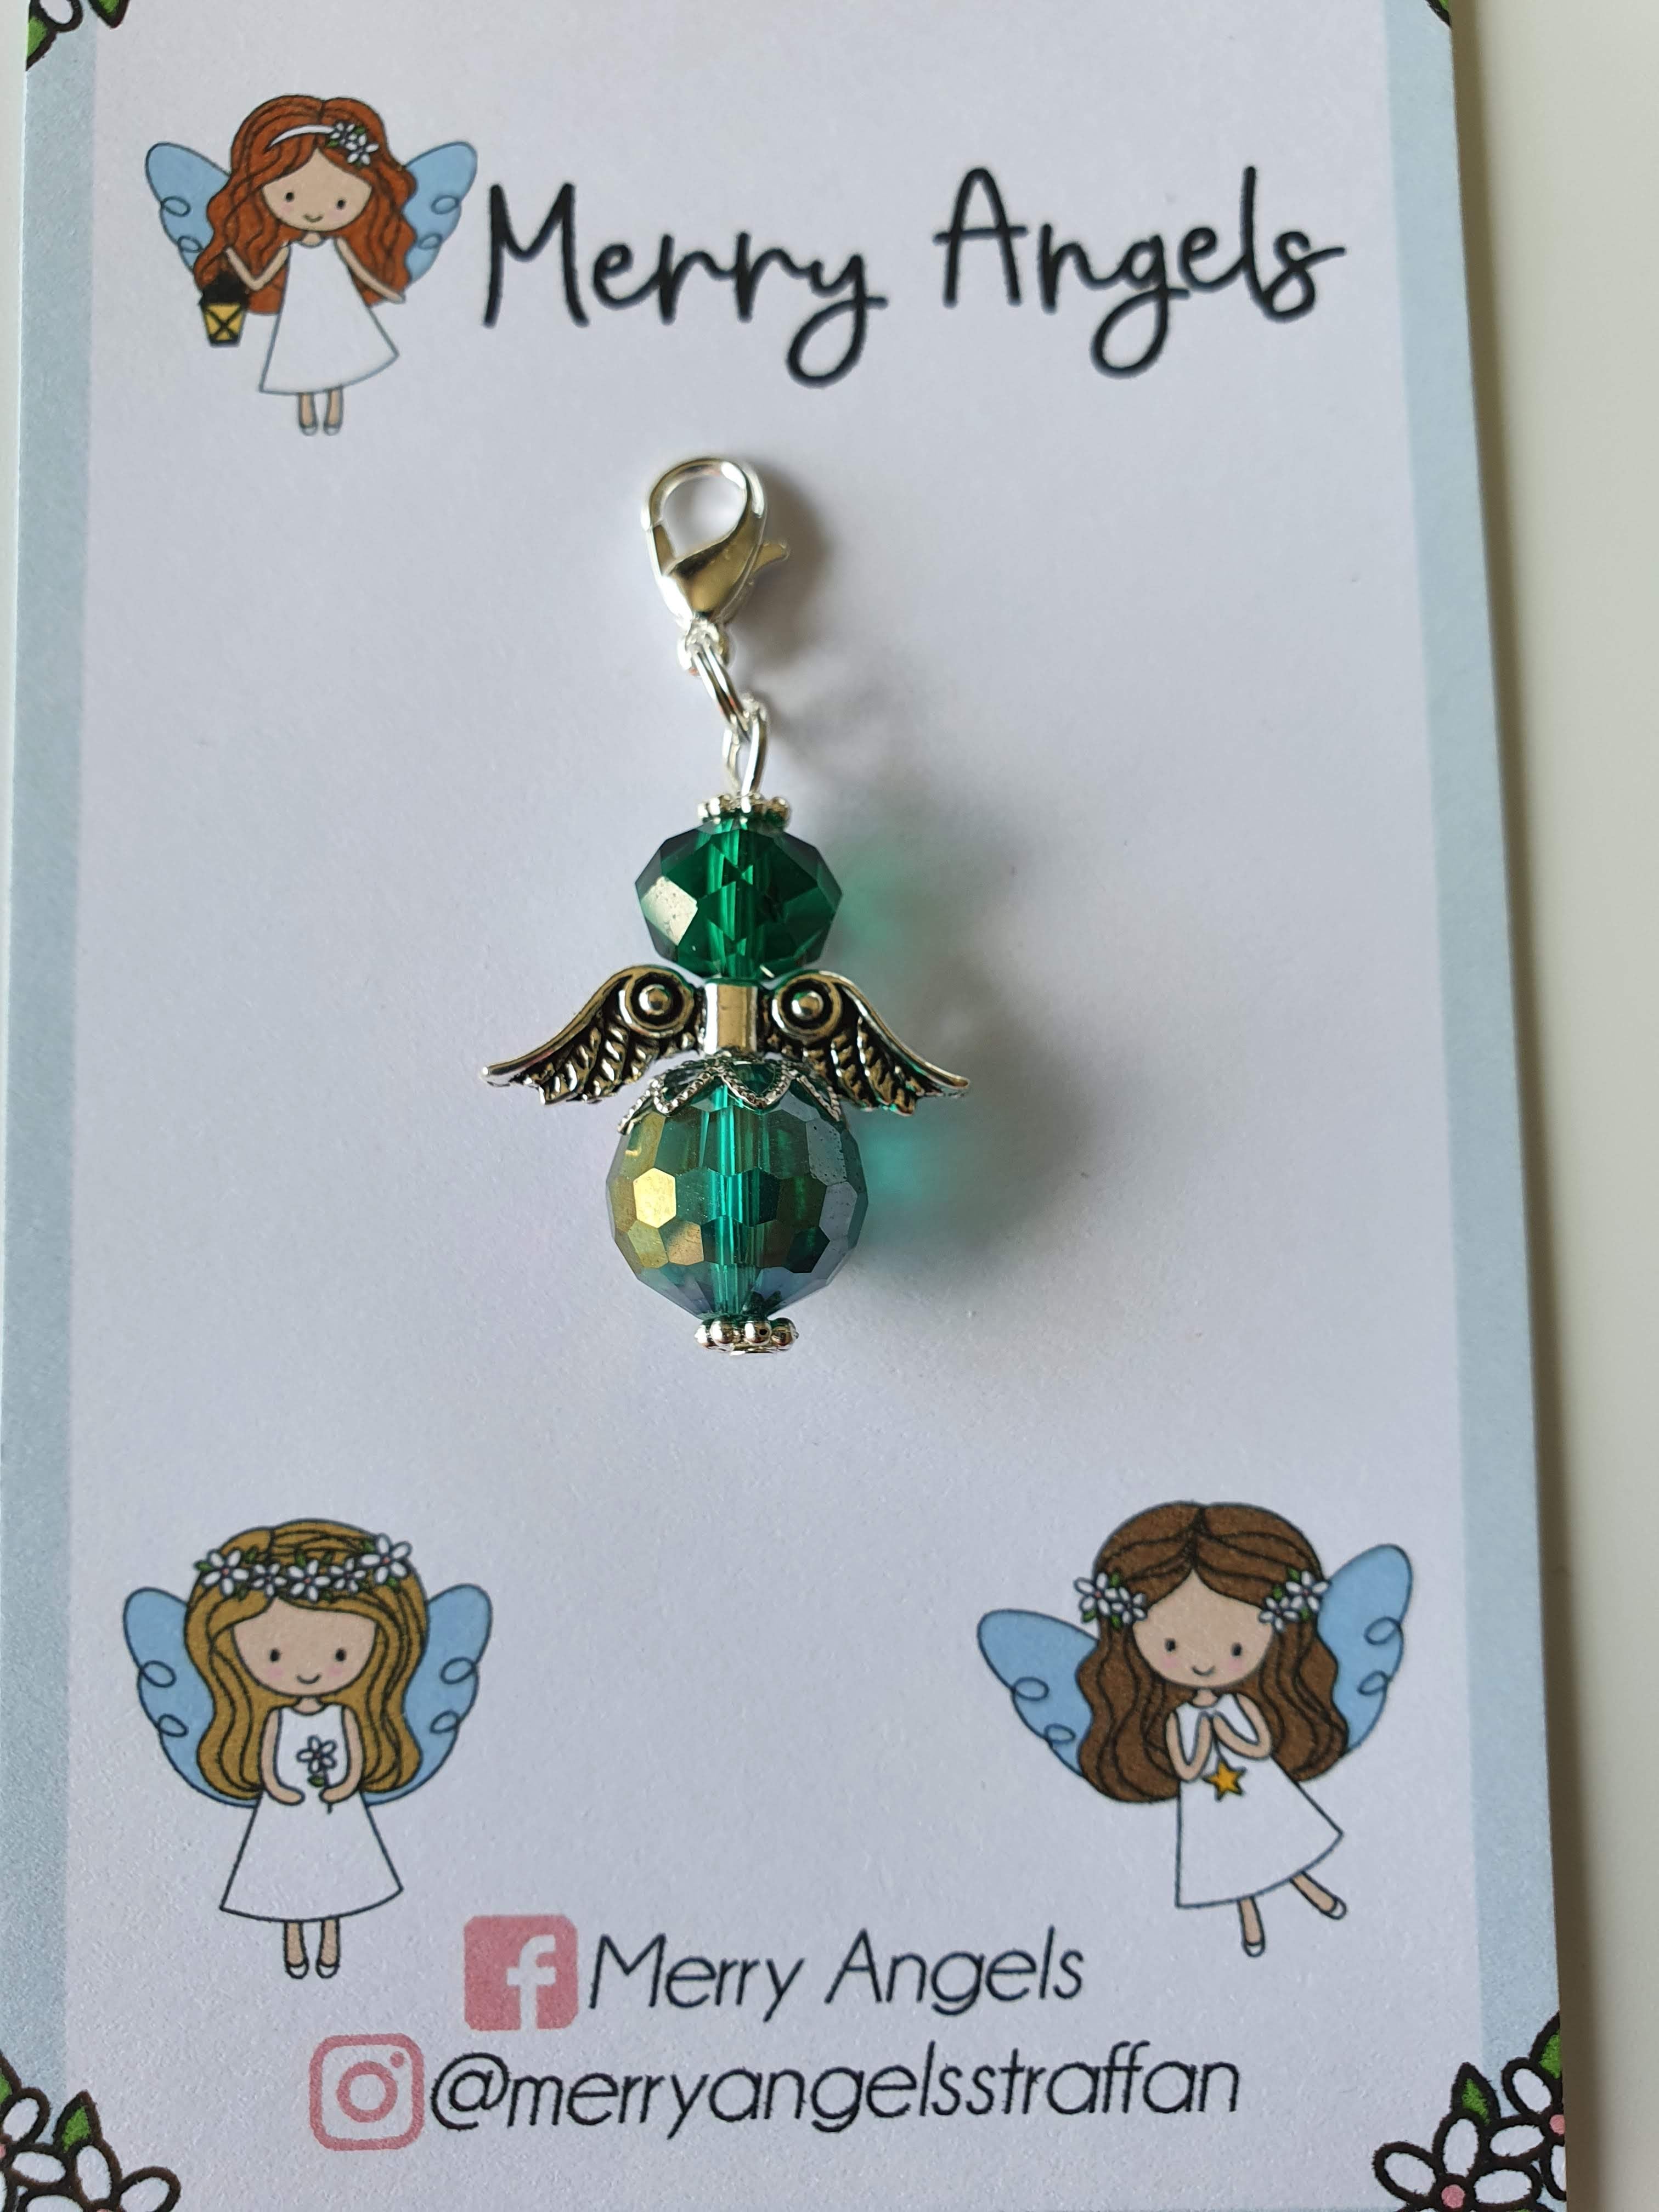 This is a picture of a green angel hug on a piece of card